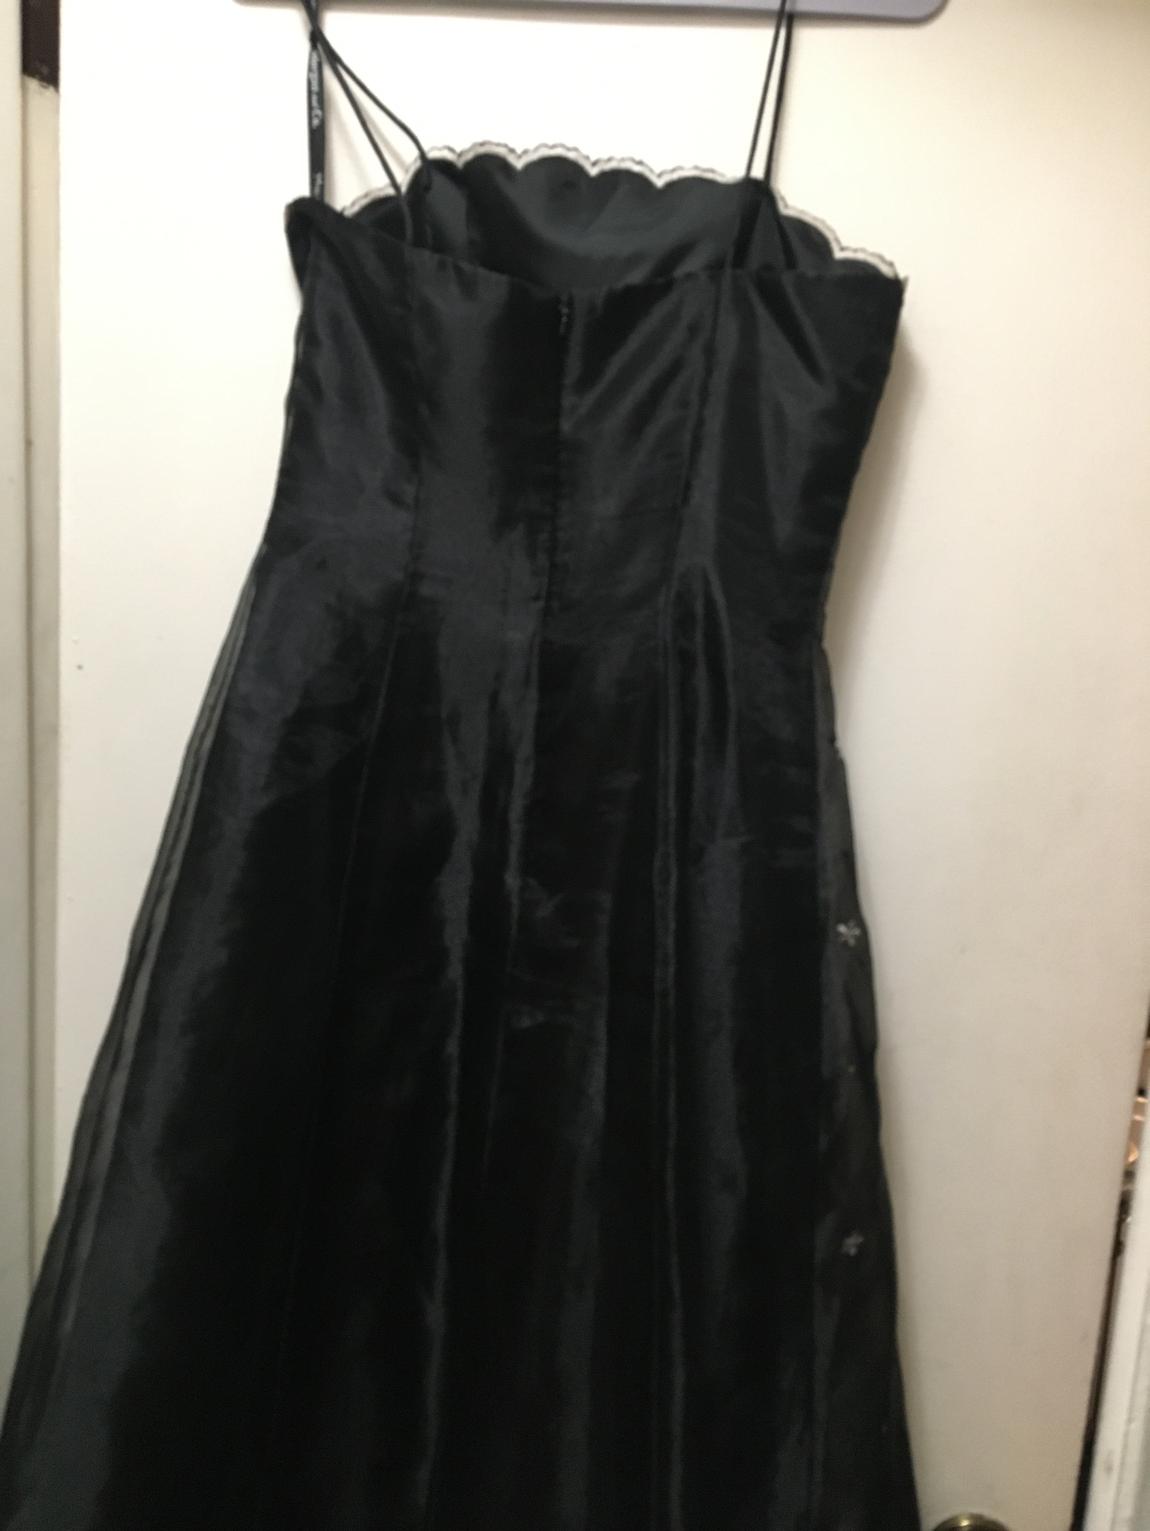 Morgan & co by Linda Bernell Size 8 Prom Black Ball Gown on Queenly